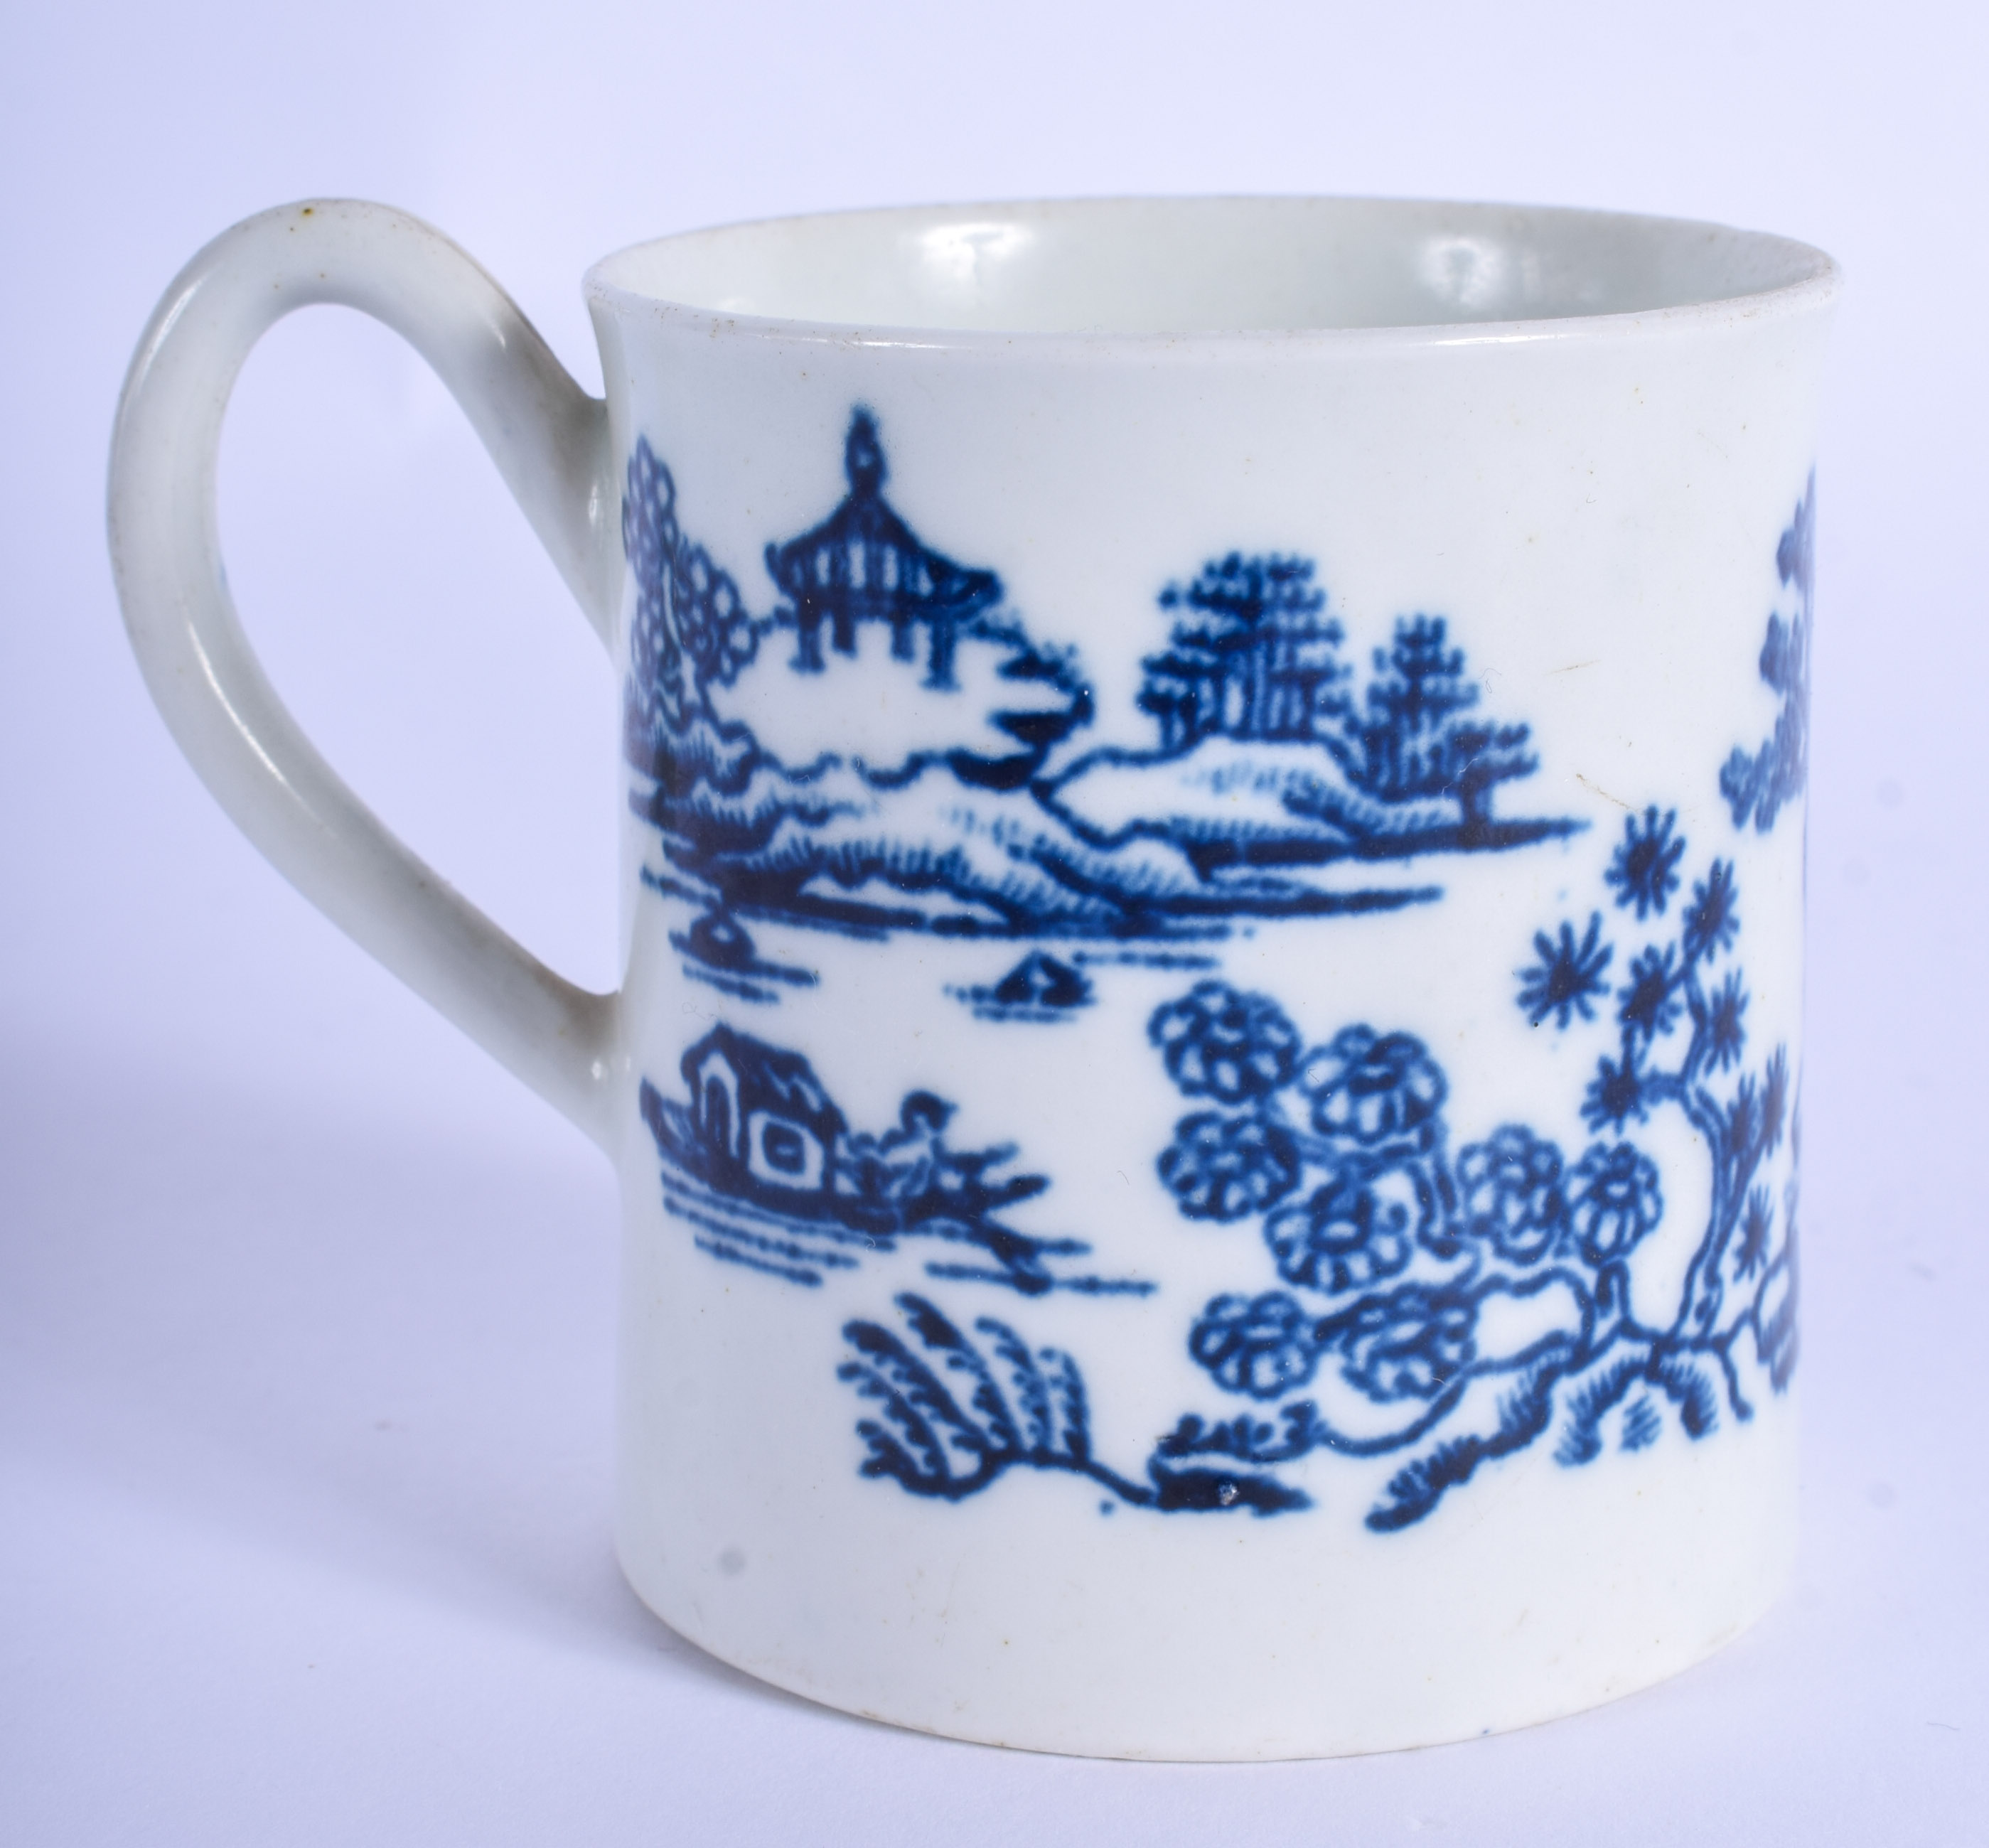 18th c. Worcester mug printed with Man in Pavilion which is considered to be Worcester earliest pri - Image 2 of 3